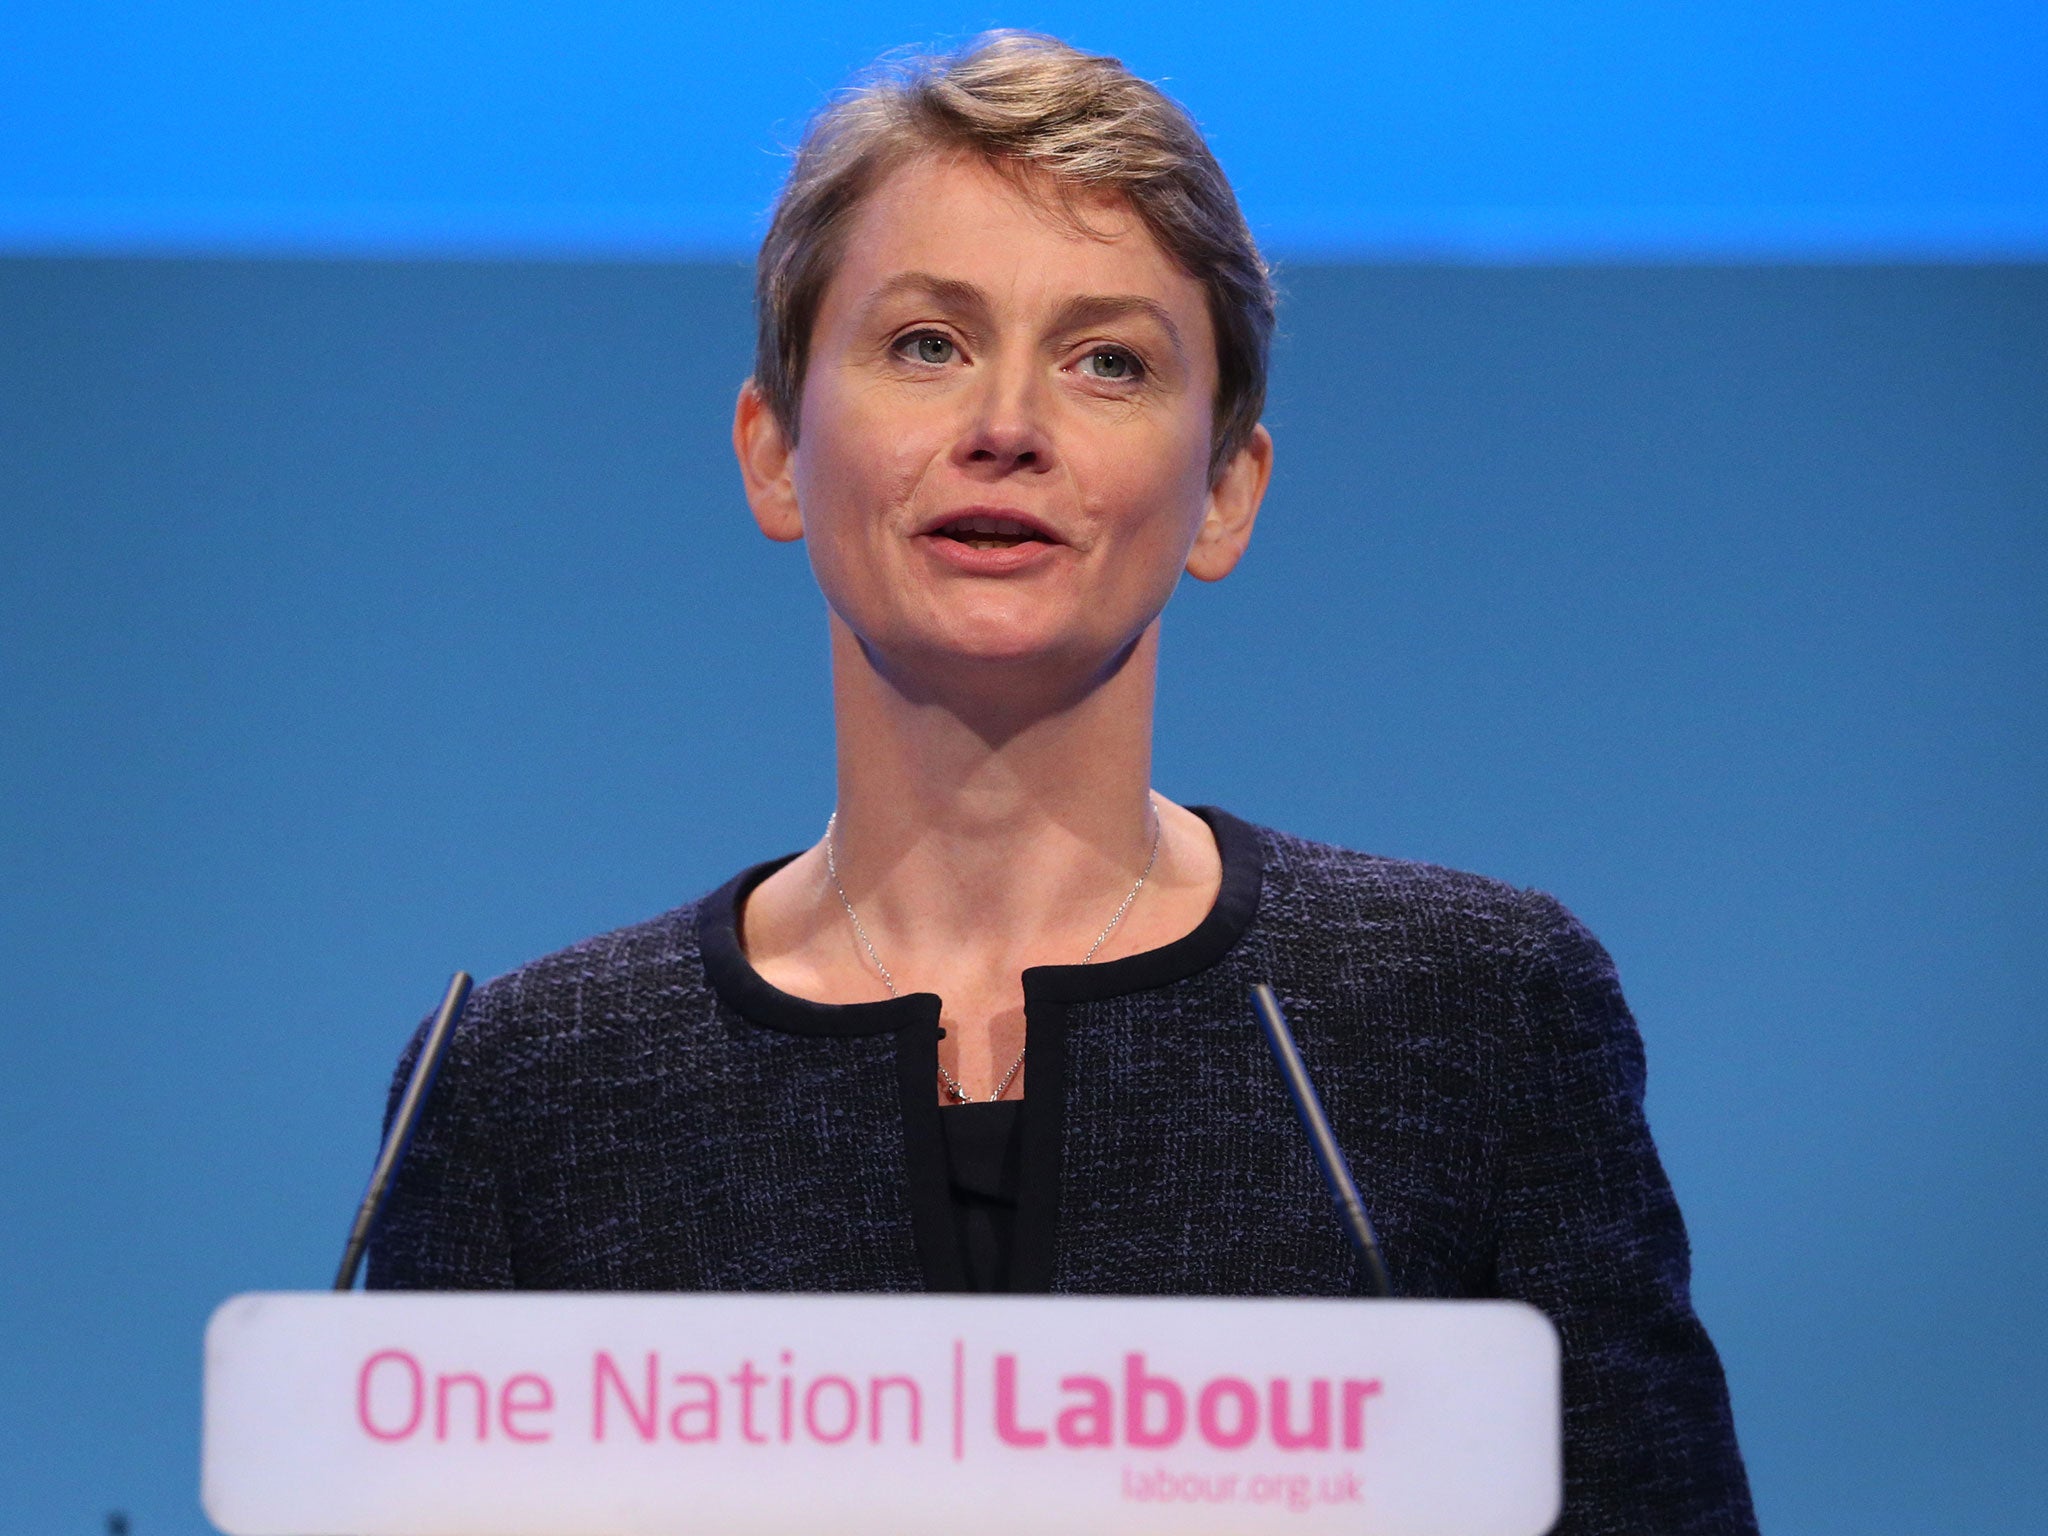 Yvette Cooper will argue in a speech that tougher checks at ports and airports are essential to rebuild faith in the immigration syste